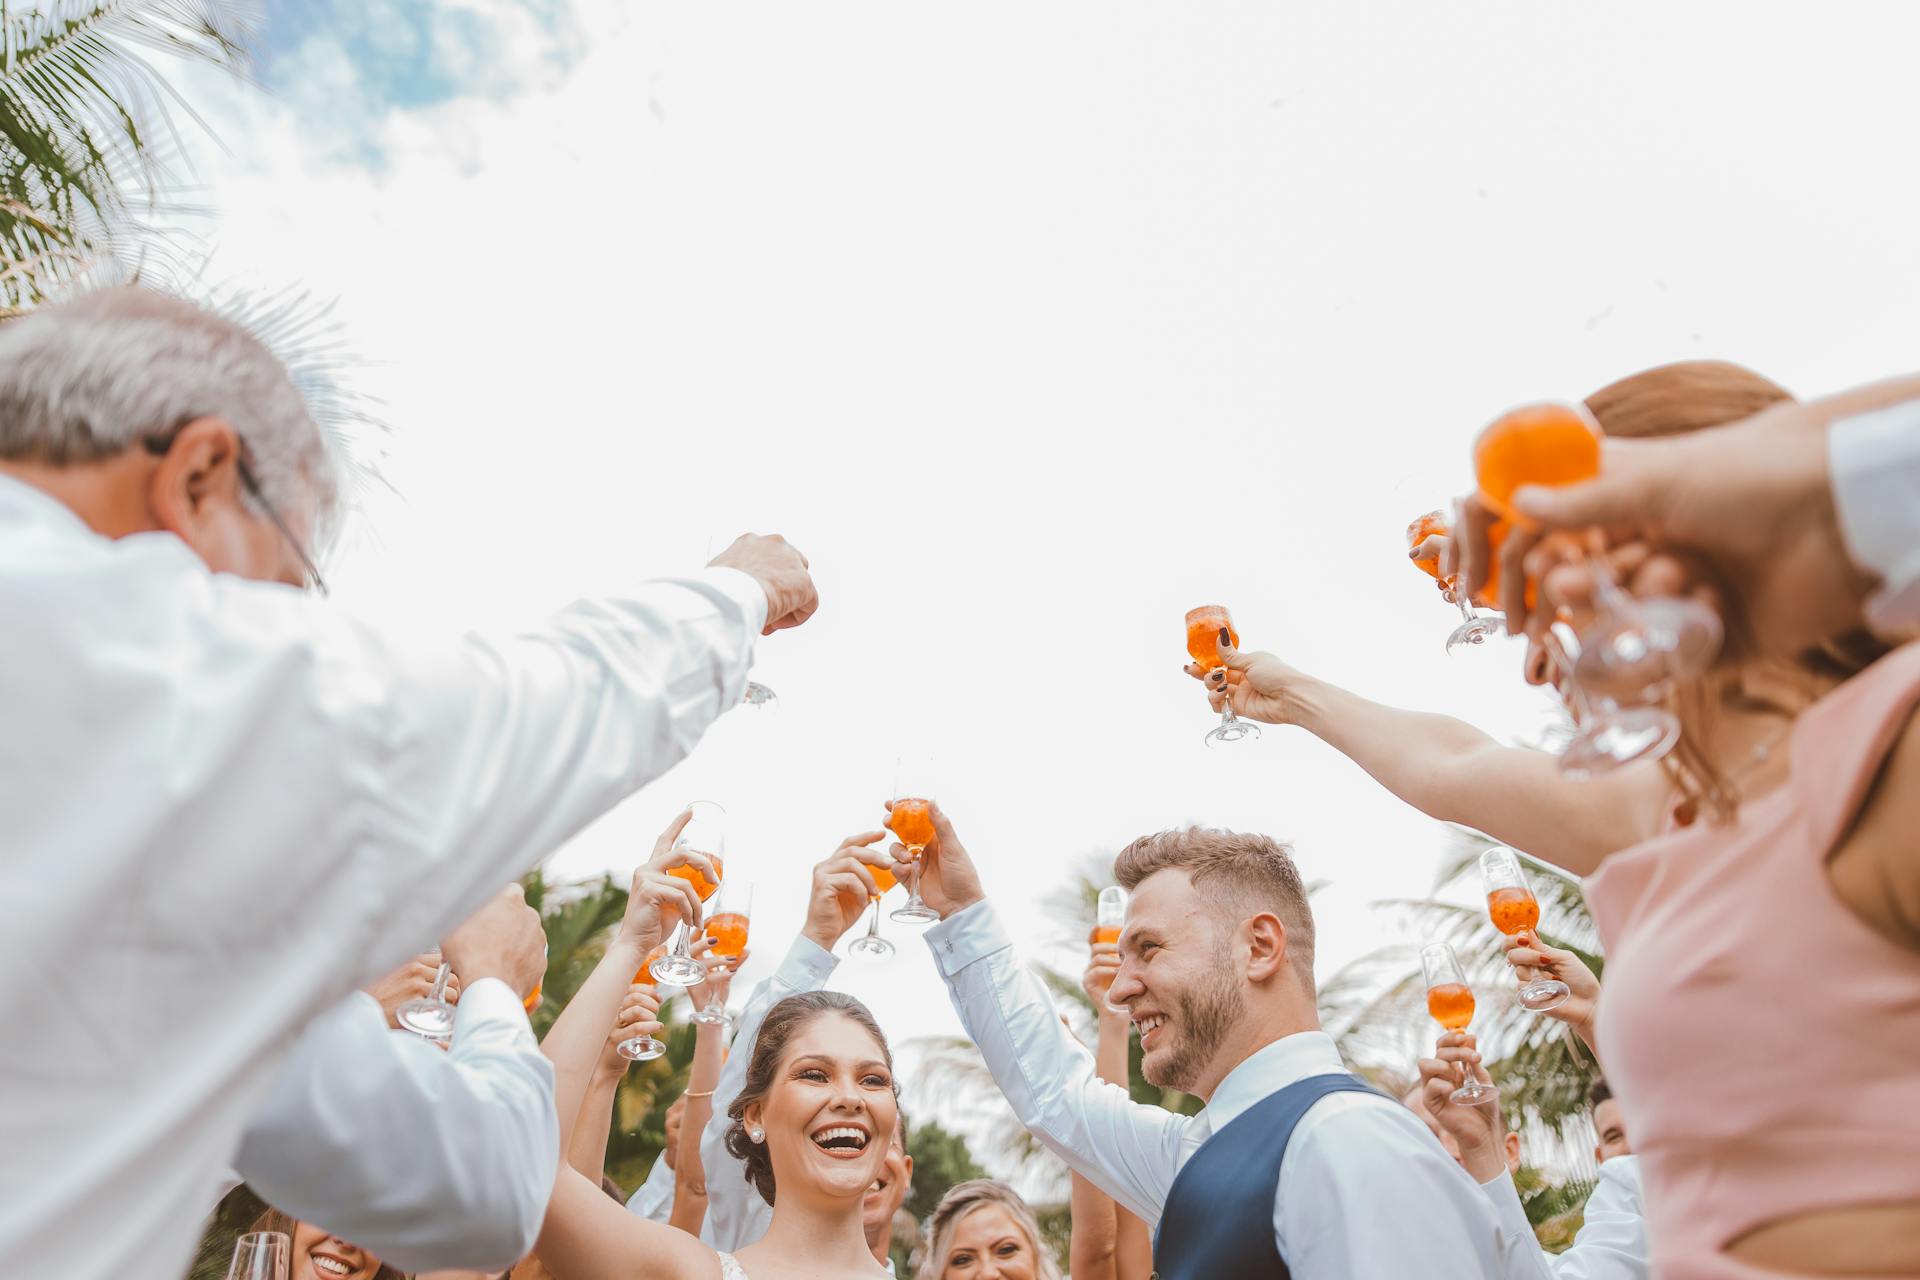 People raising their drinks to toast during a wedding reception | Source: Pexels